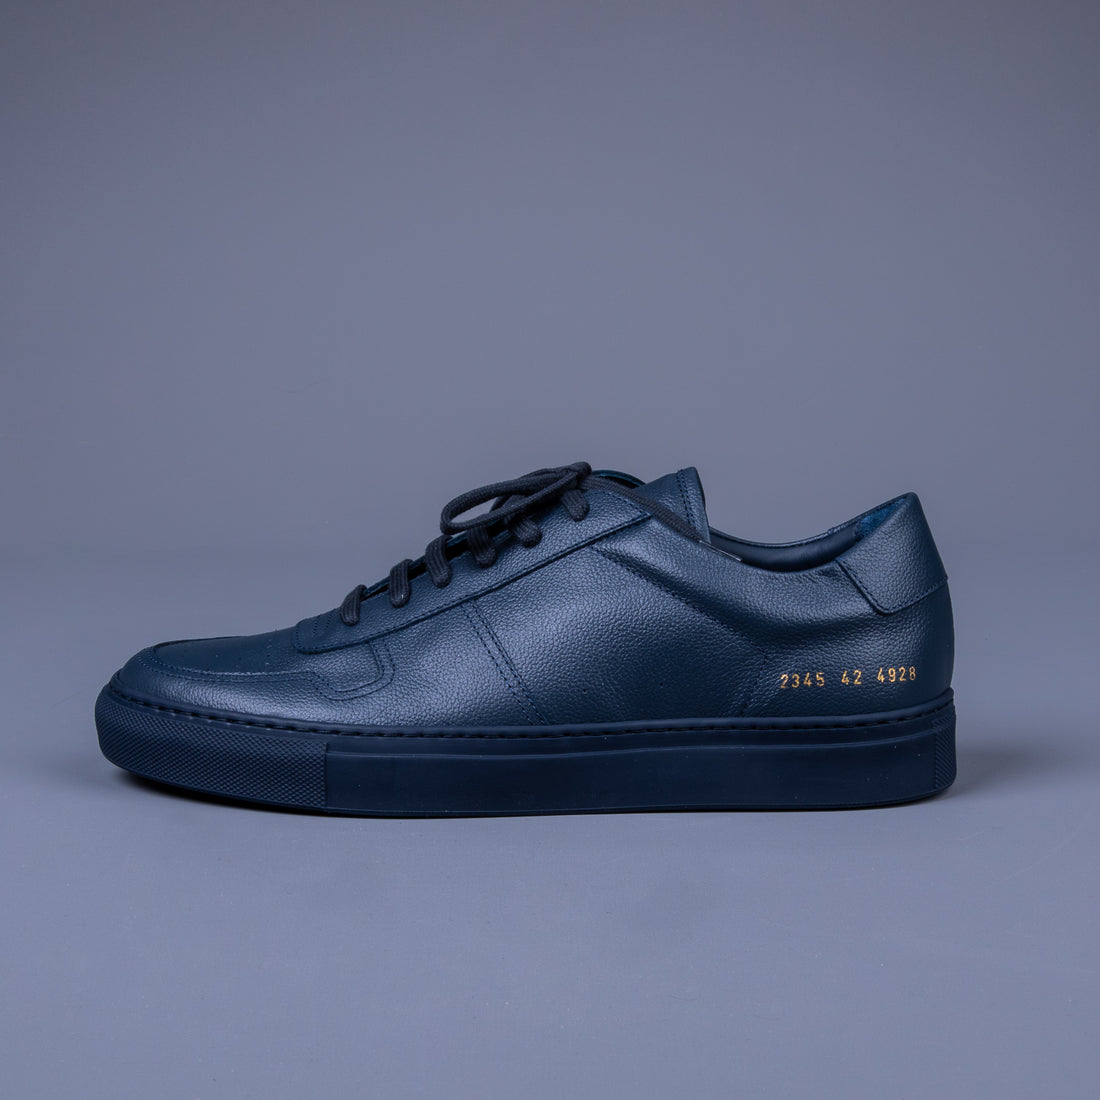 Common Projects Bball Low Bumpy Navy